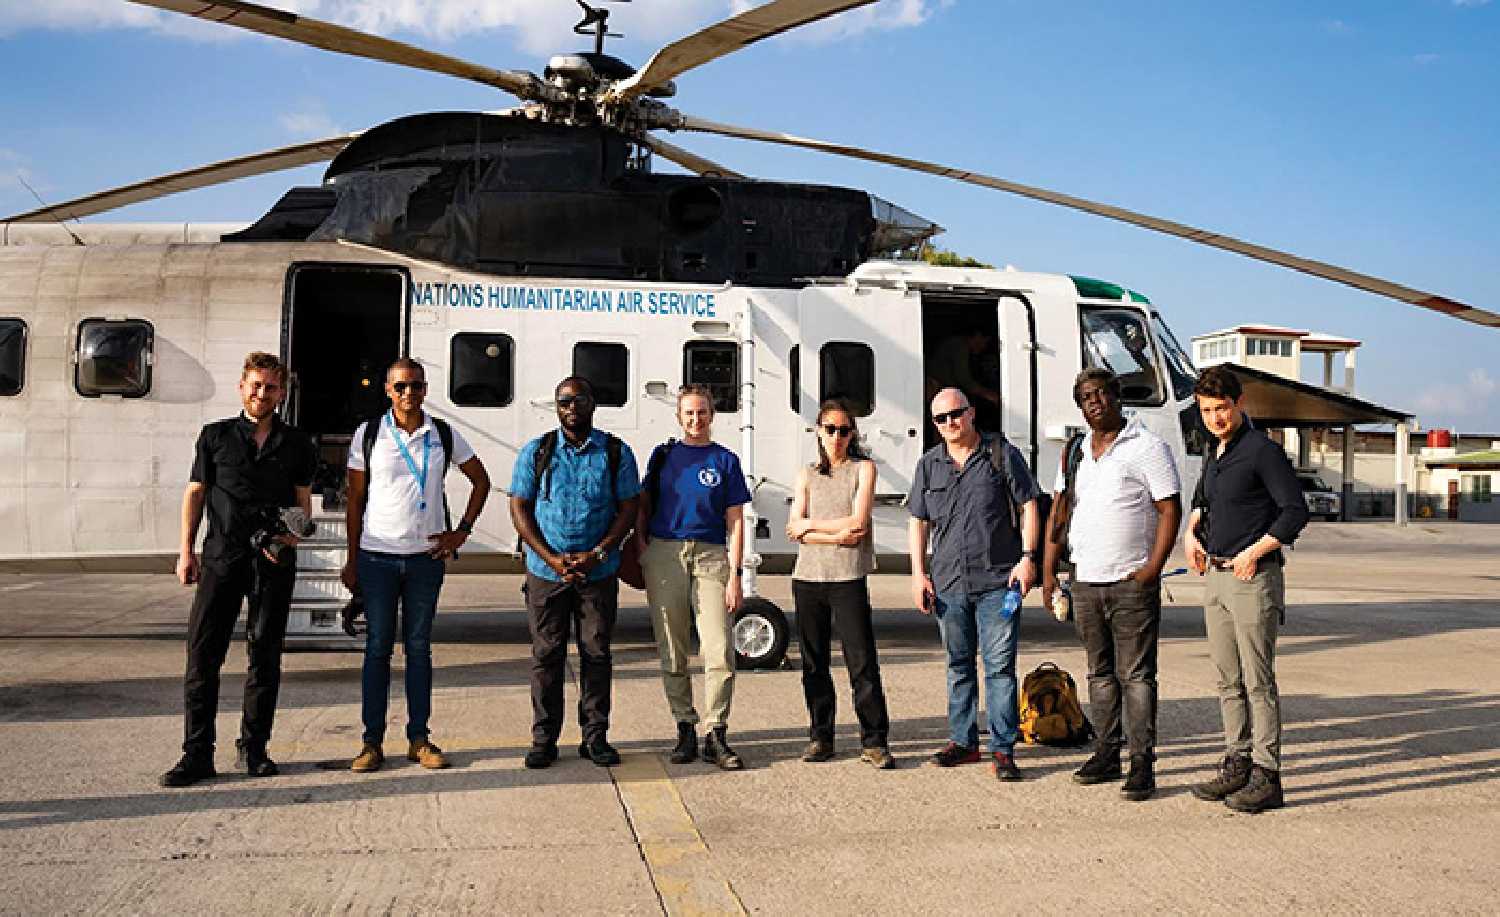 Tanya Birkbeck (in the dark blue shirt at centre) with World Food Program Haiti Country Director, WFP security and a CNN crew after a day of content collection in Jrmie, in the south of Haiti. The helicopter is a UN Humanitarian Air Service aircraft, which is a designated air service for humanitarian use, run by the WFP.